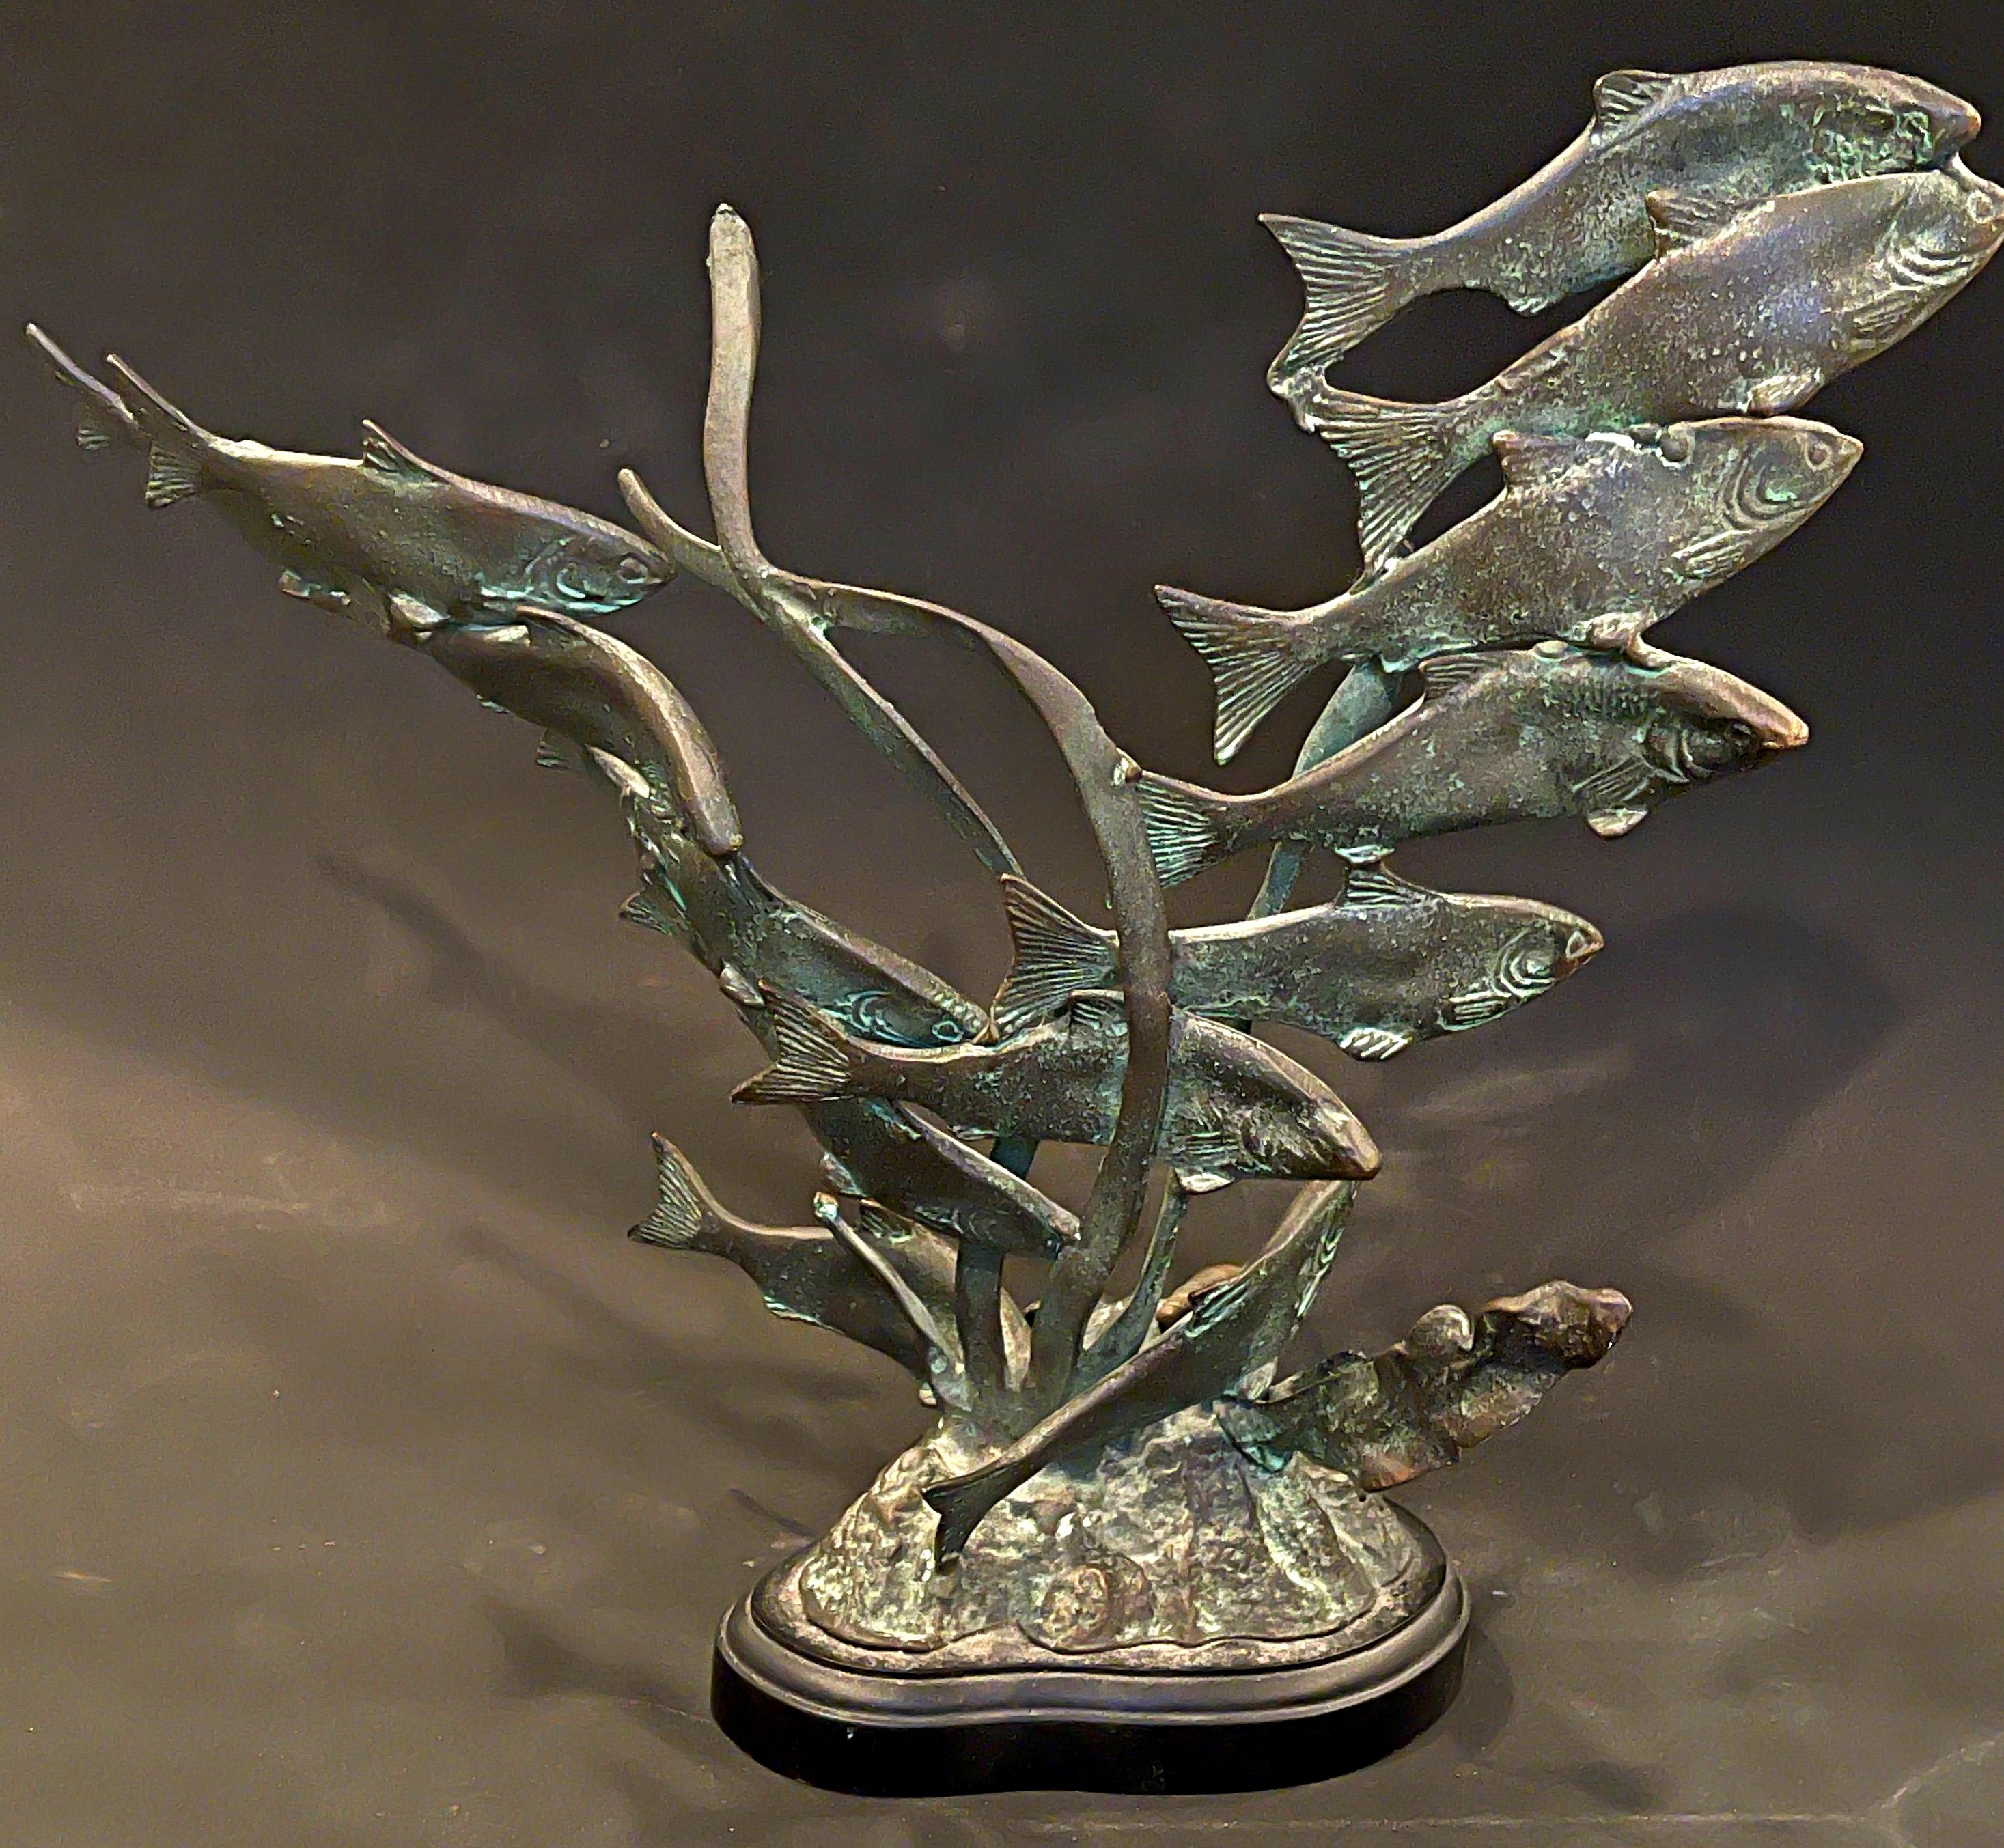 Charming and lively, this rare bronze sculpture depicts a school of fish, undulating in the ocean current, intermixed with seaweed rising from the sea floor littered with seashells, all finished in a lovely classic bronze patina highlighted in green